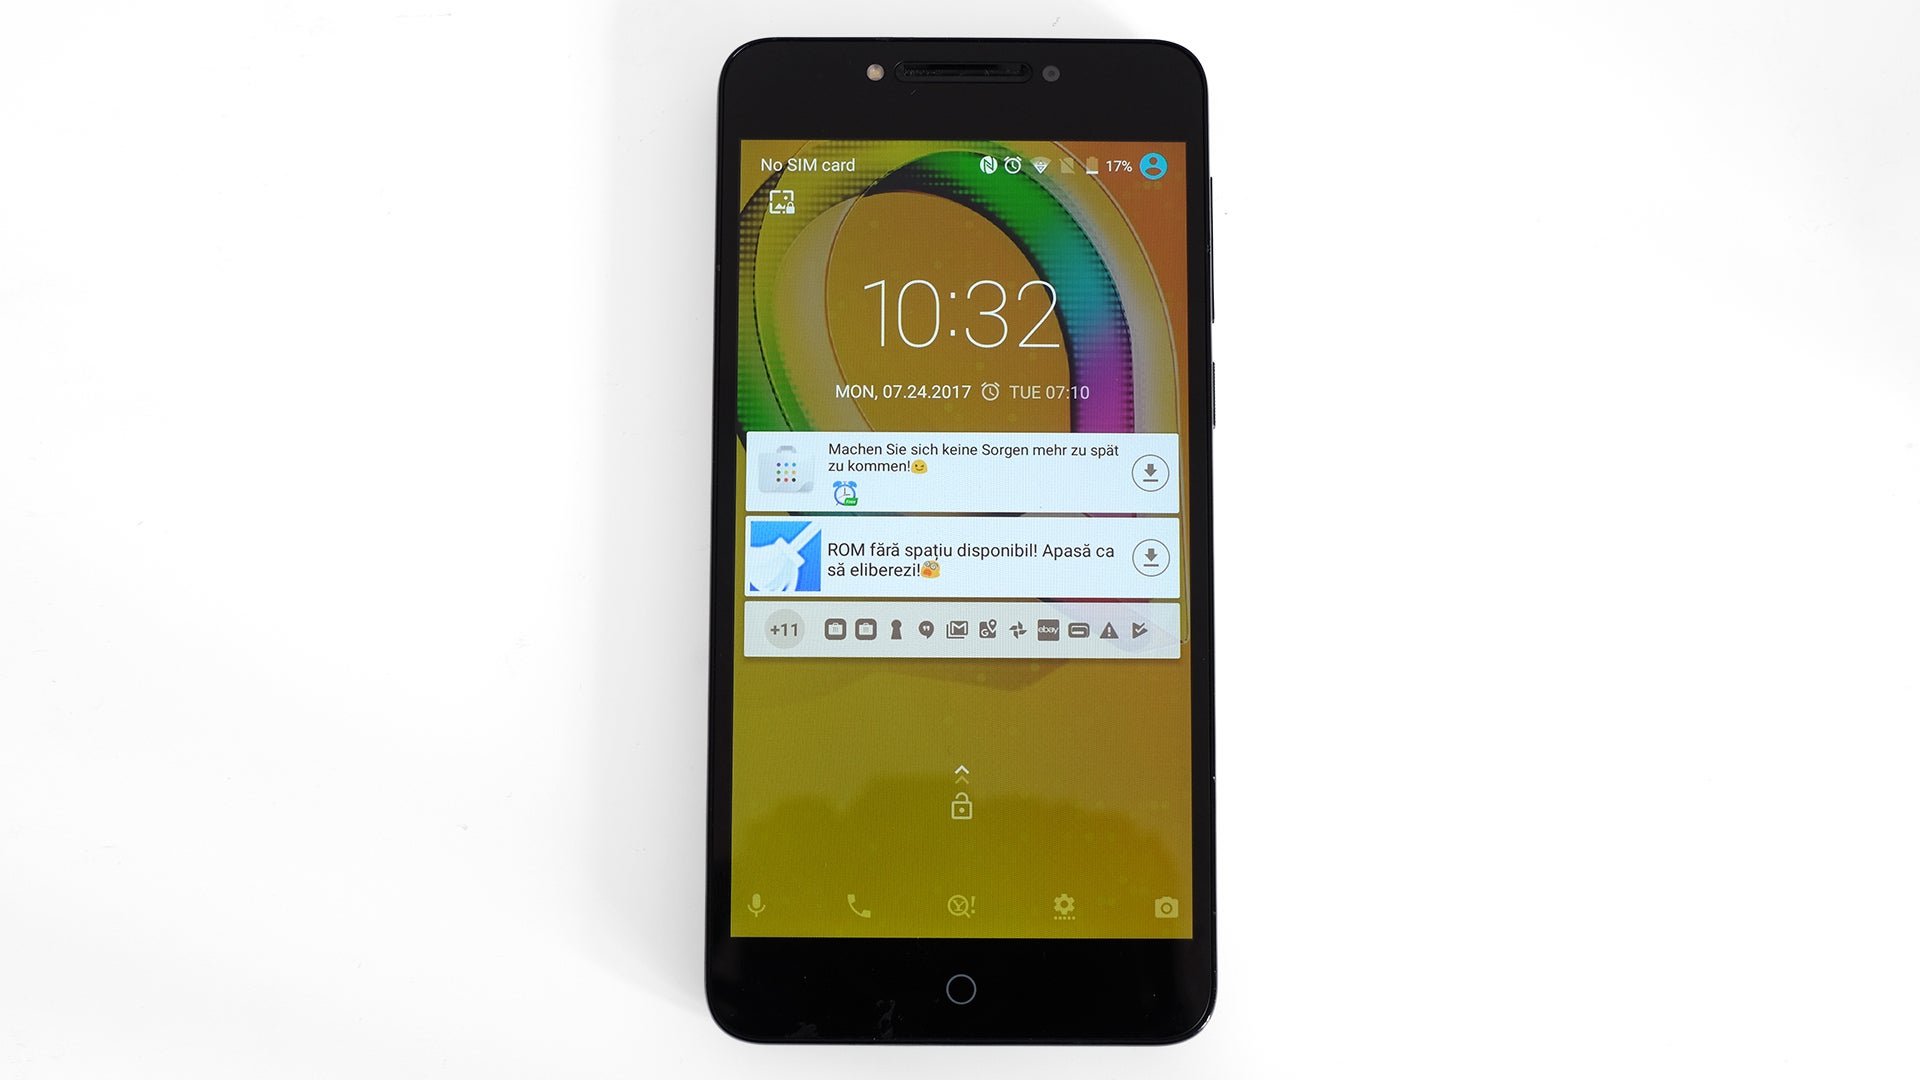 Alcatel A5 LED smartphone with notifications on screen.